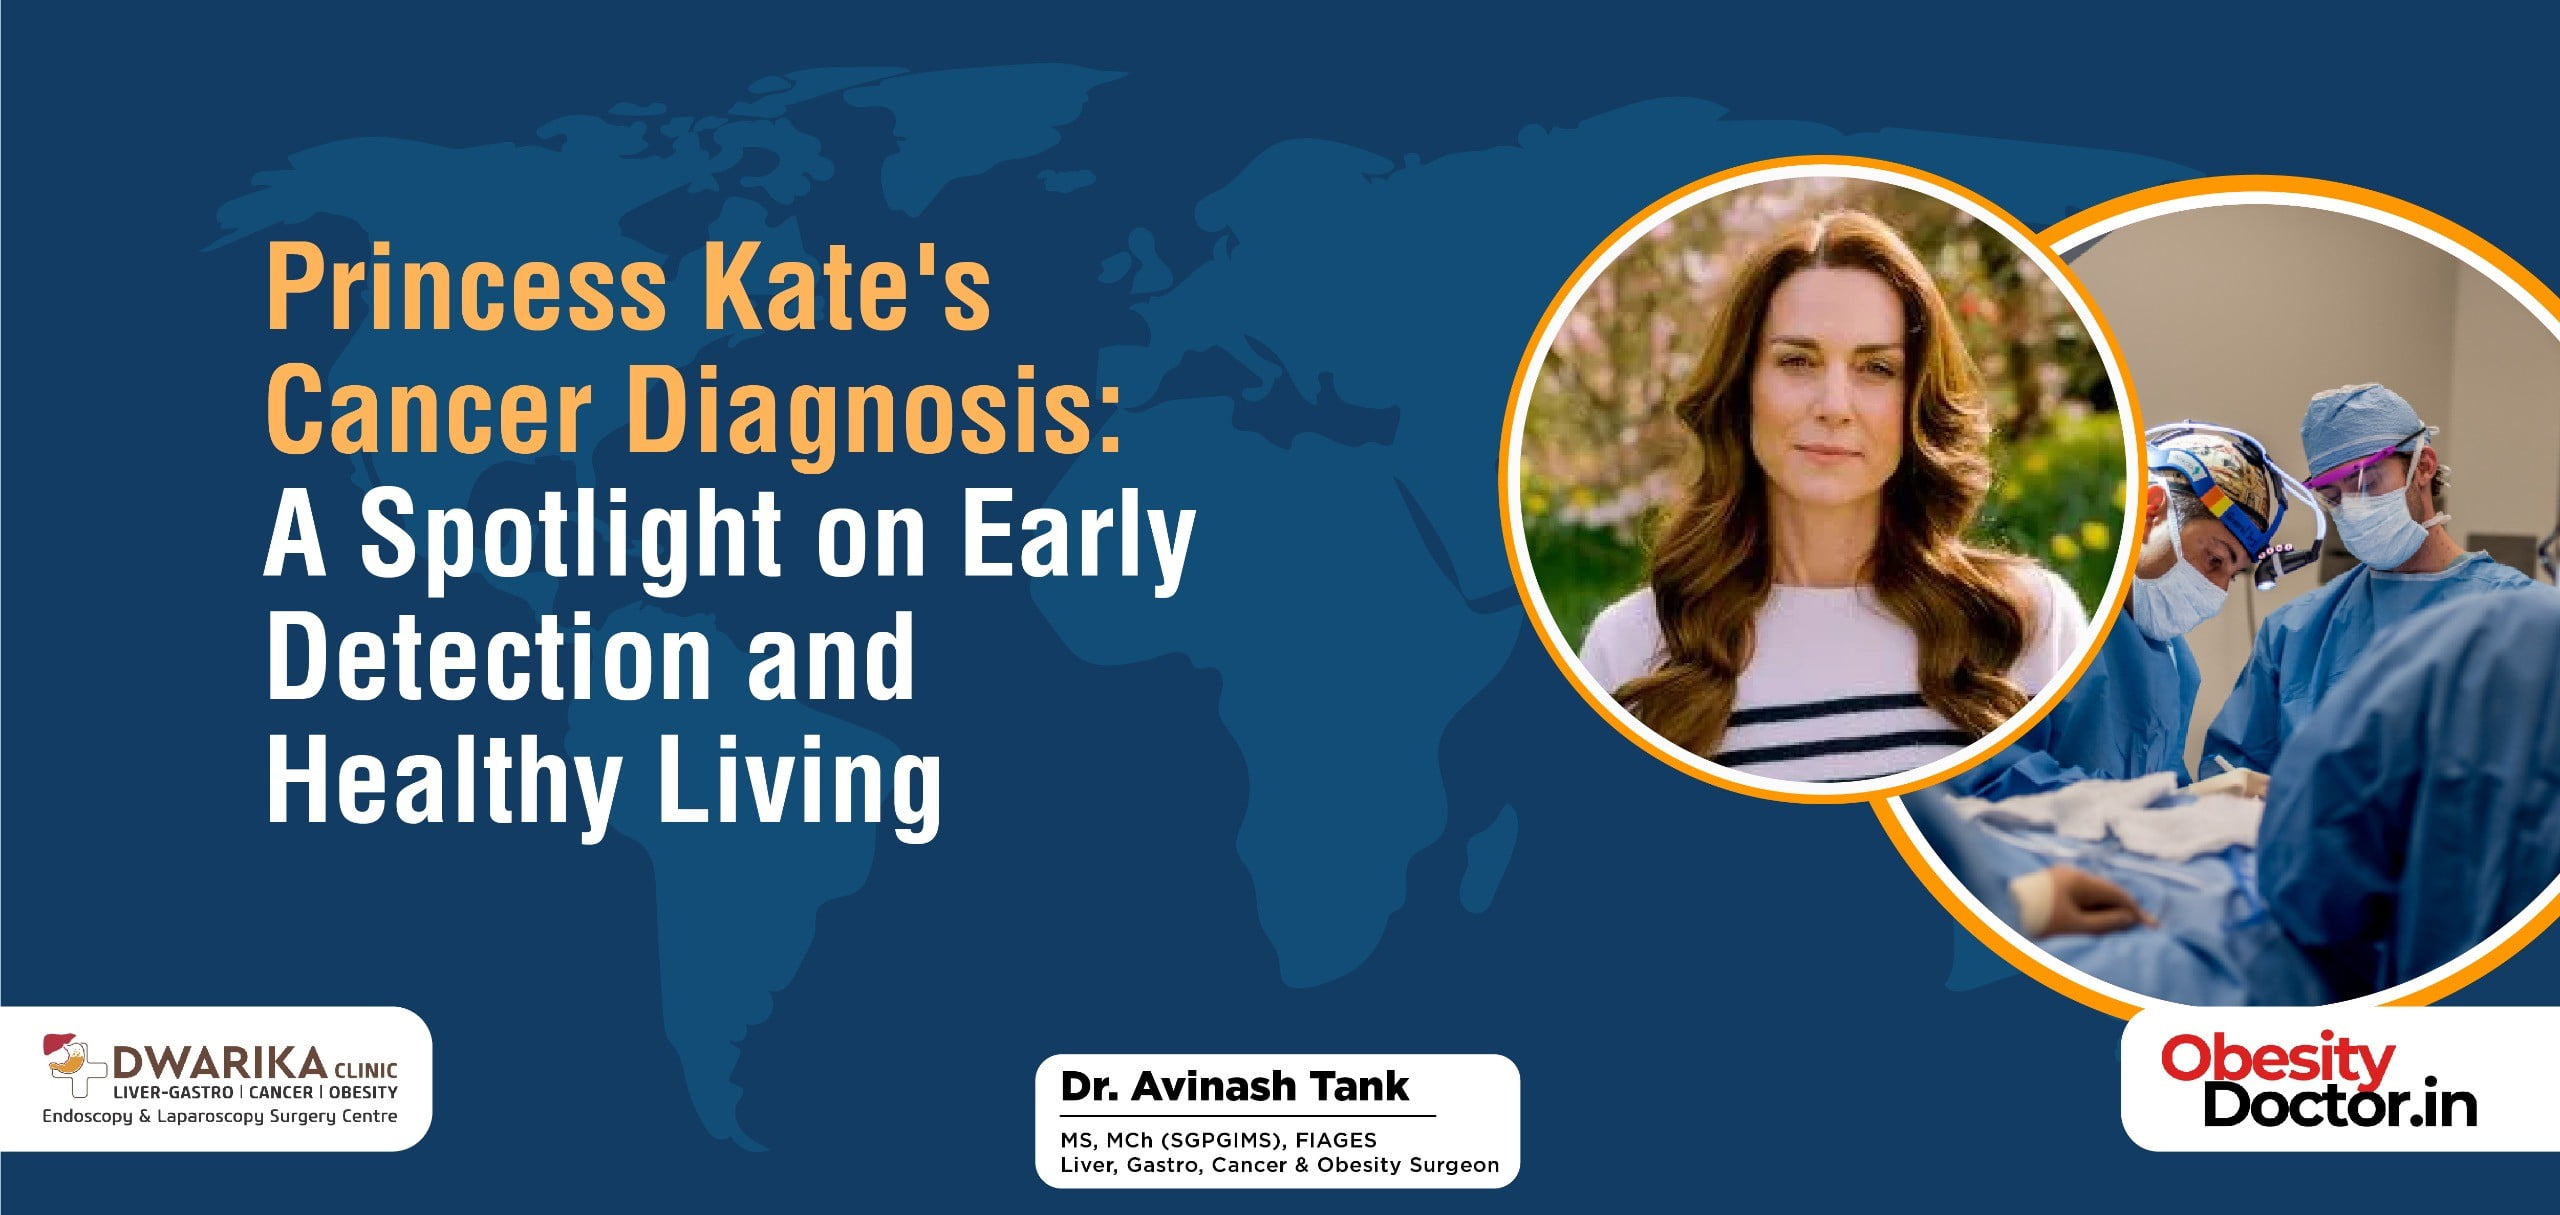 Princess Kate’s Cancer Diagnosis: A Spotlight on Early Detection and Healthy Living